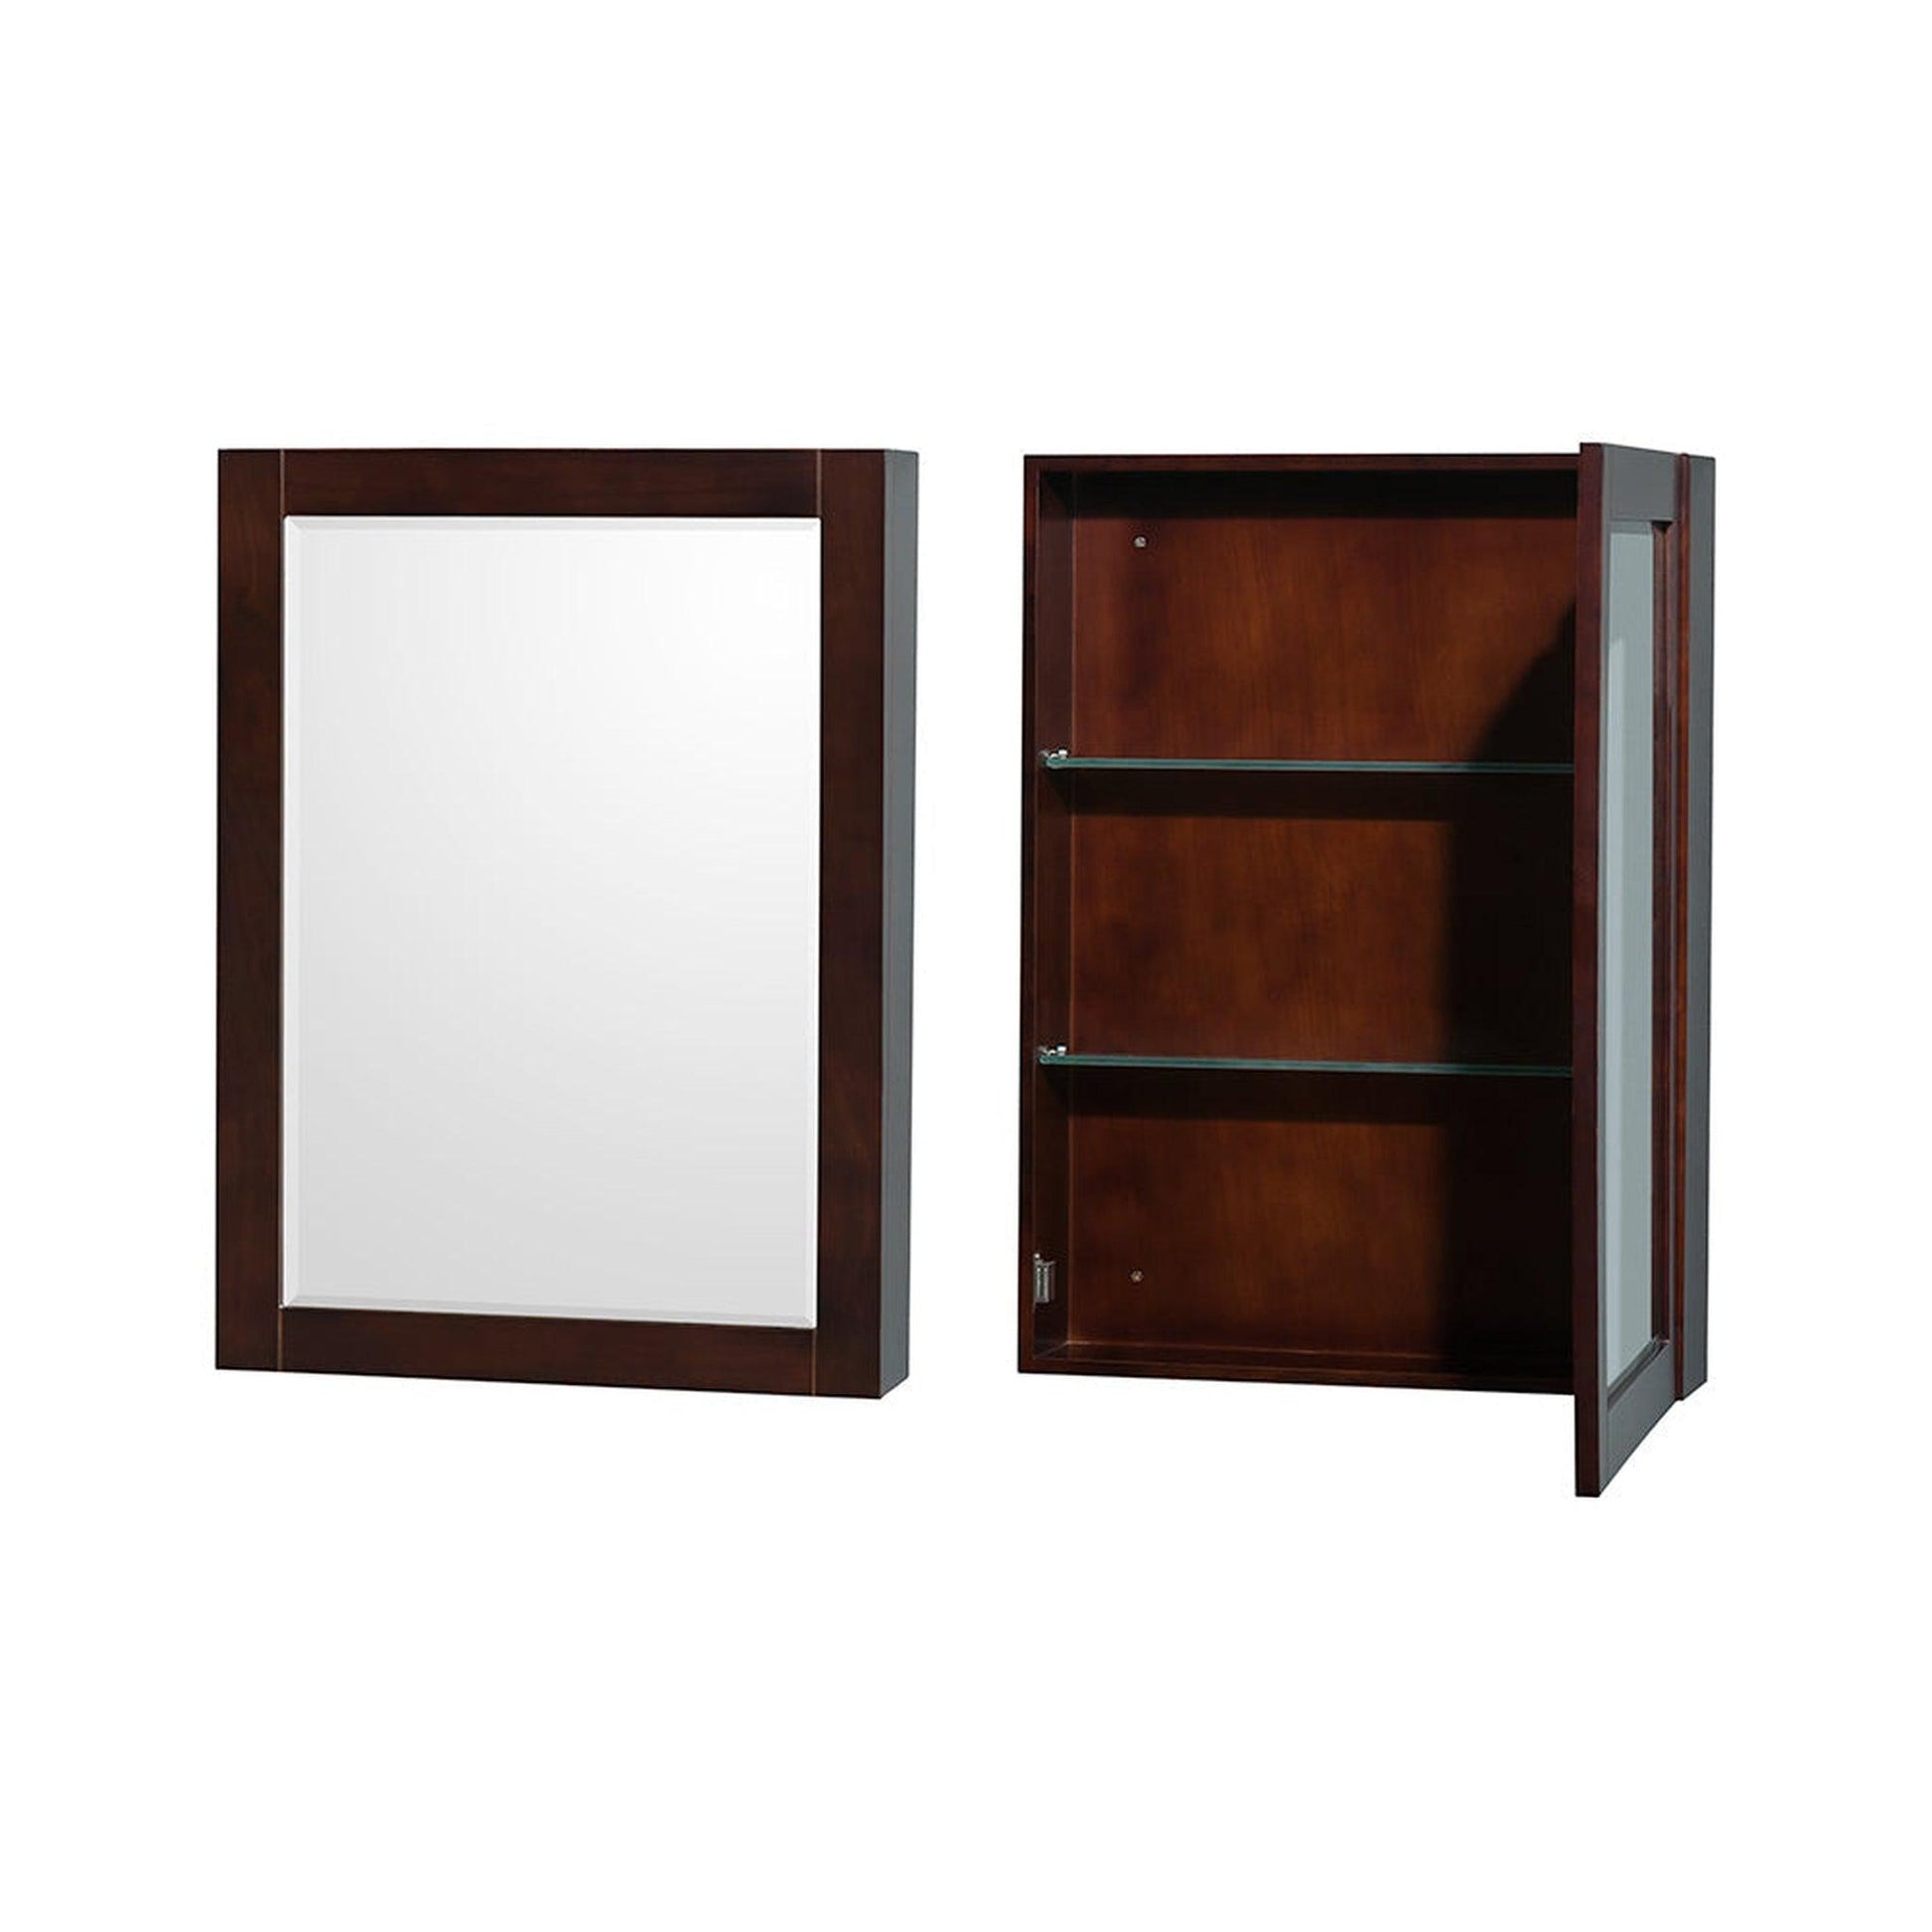 Wyndham Collection Sheffield 80" Double Bathroom Vanity in Espresso, White Cultured Marble Countertop, Undermount Square Sinks, Medicine Cabinet